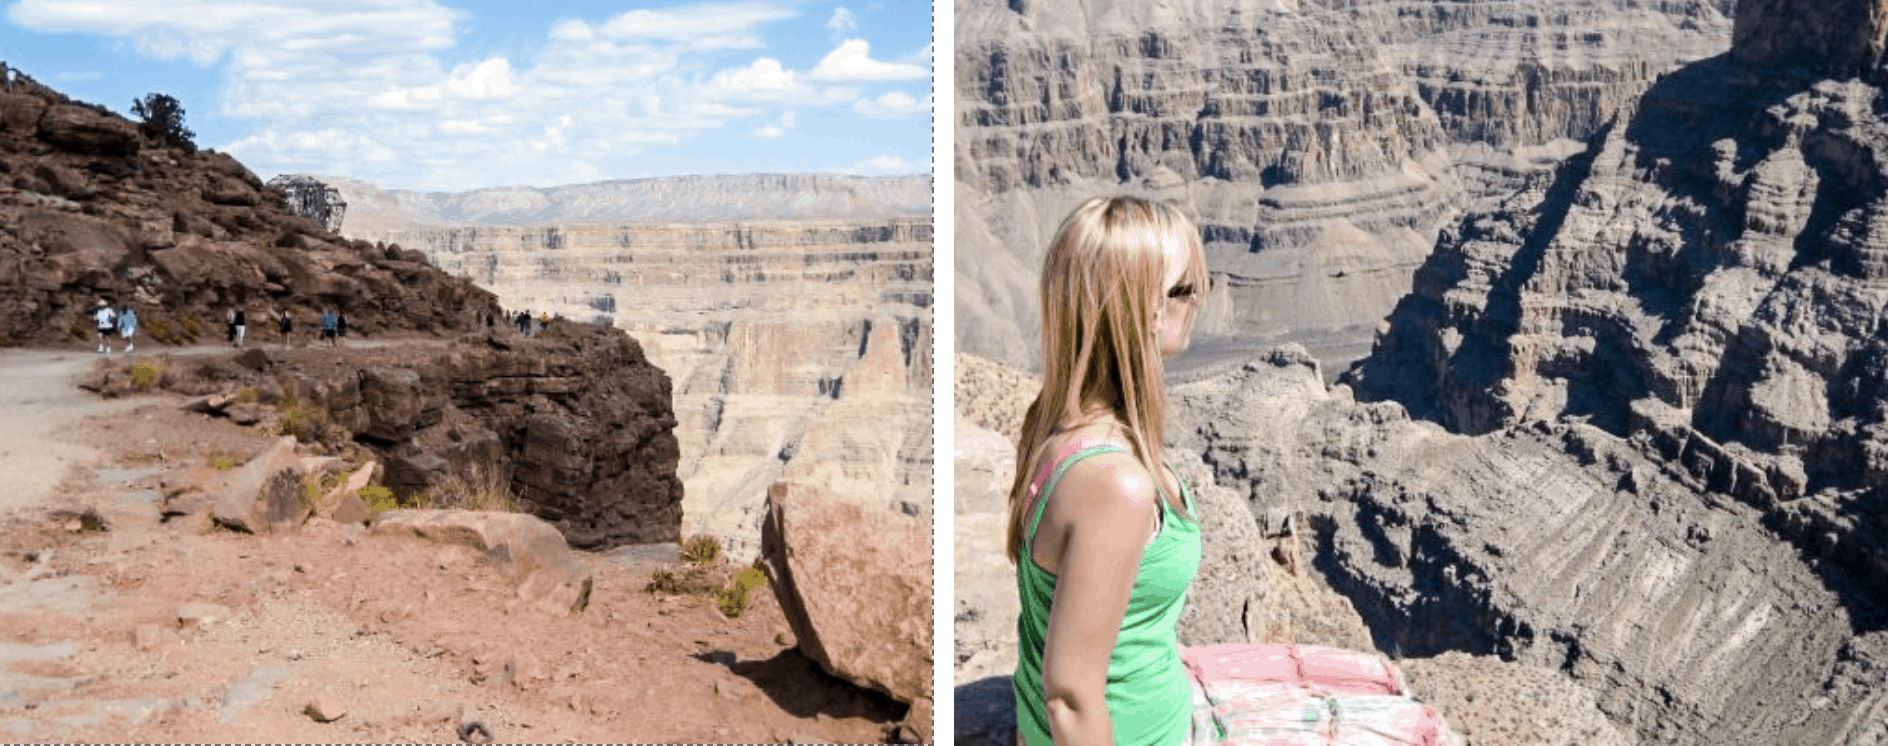 Solo traveller on Grand Canyon day trip from Las Vegas